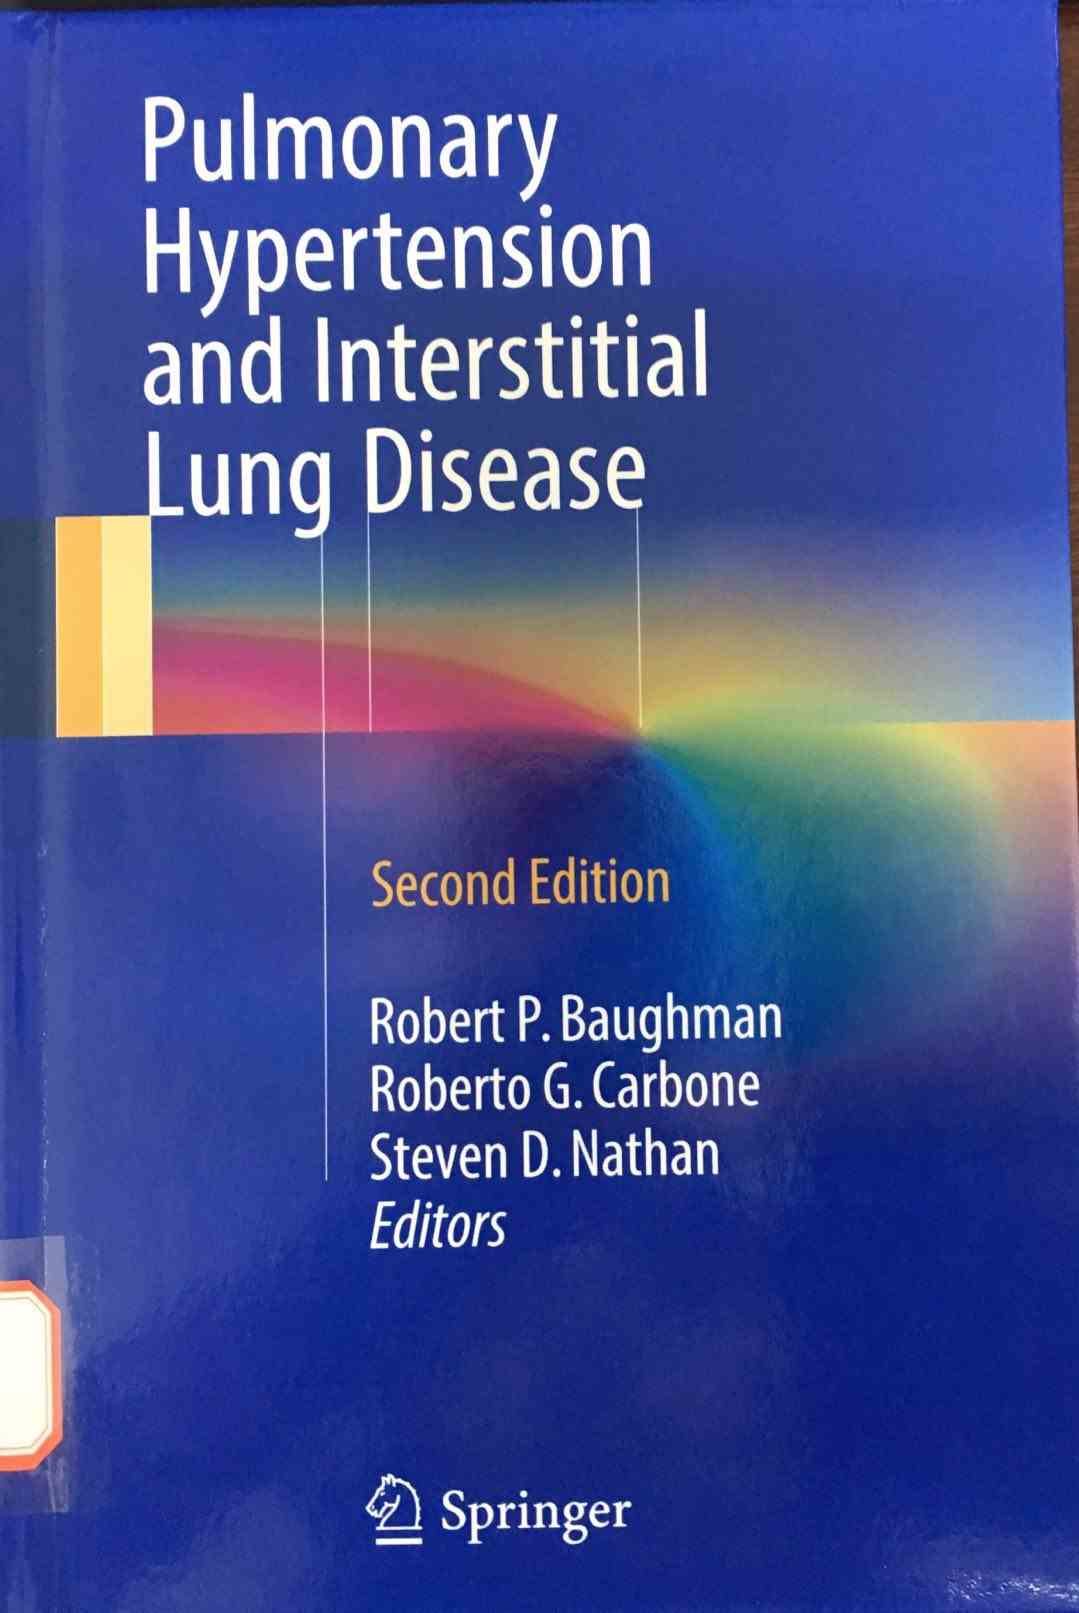 «Pulmonary Hypertension and Interstitial Lung Disease»